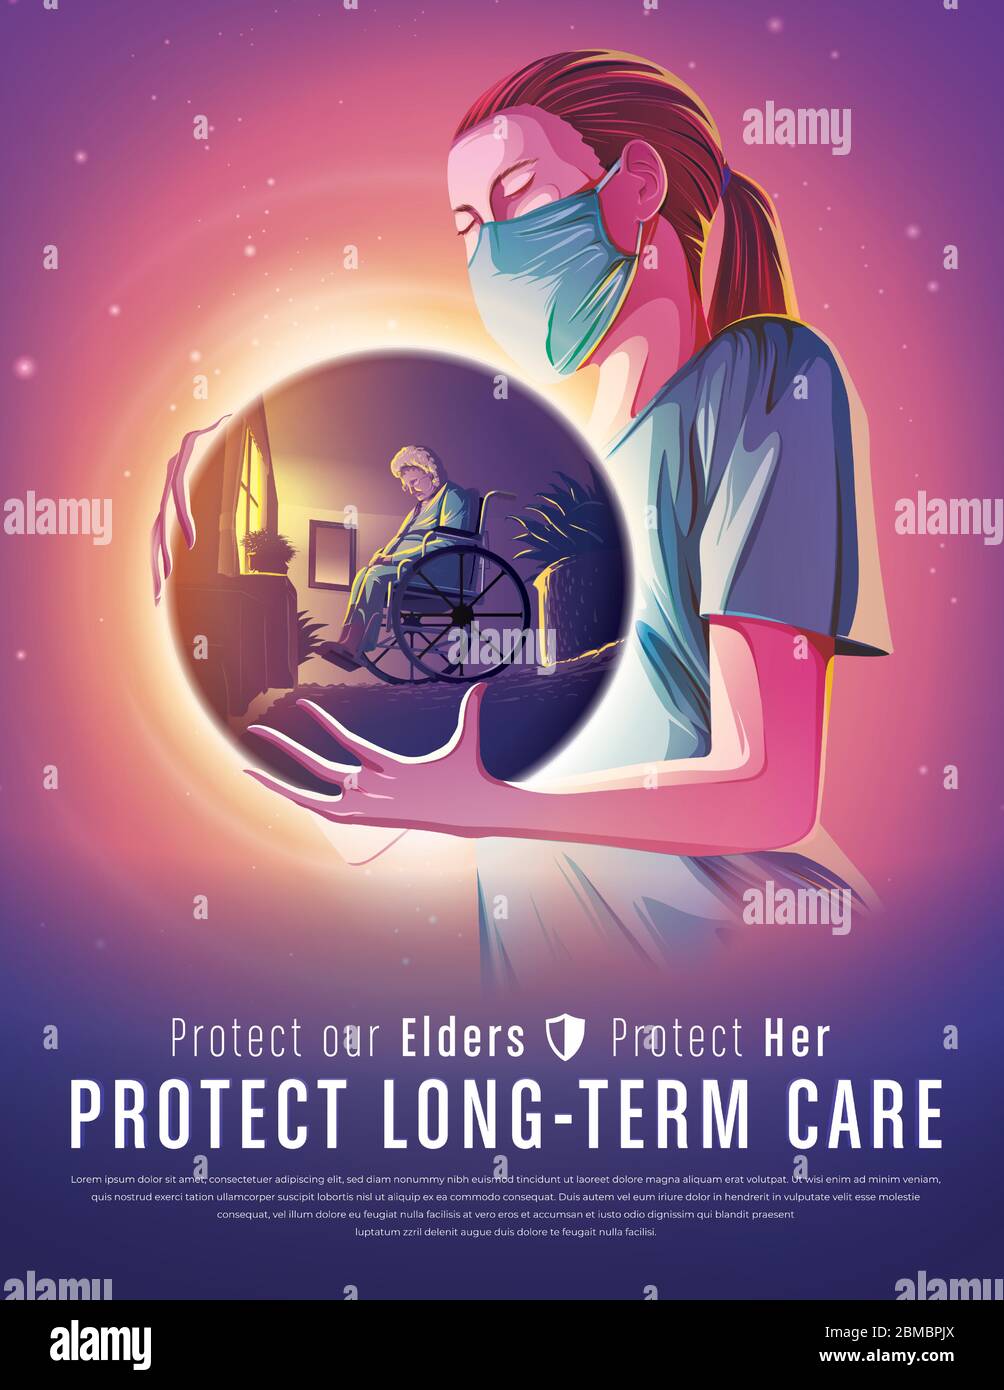 An imaginary illustration featuring the female long-term care worker holding an abstract spherical shape that has the image of the female elder sittin Stock Vector